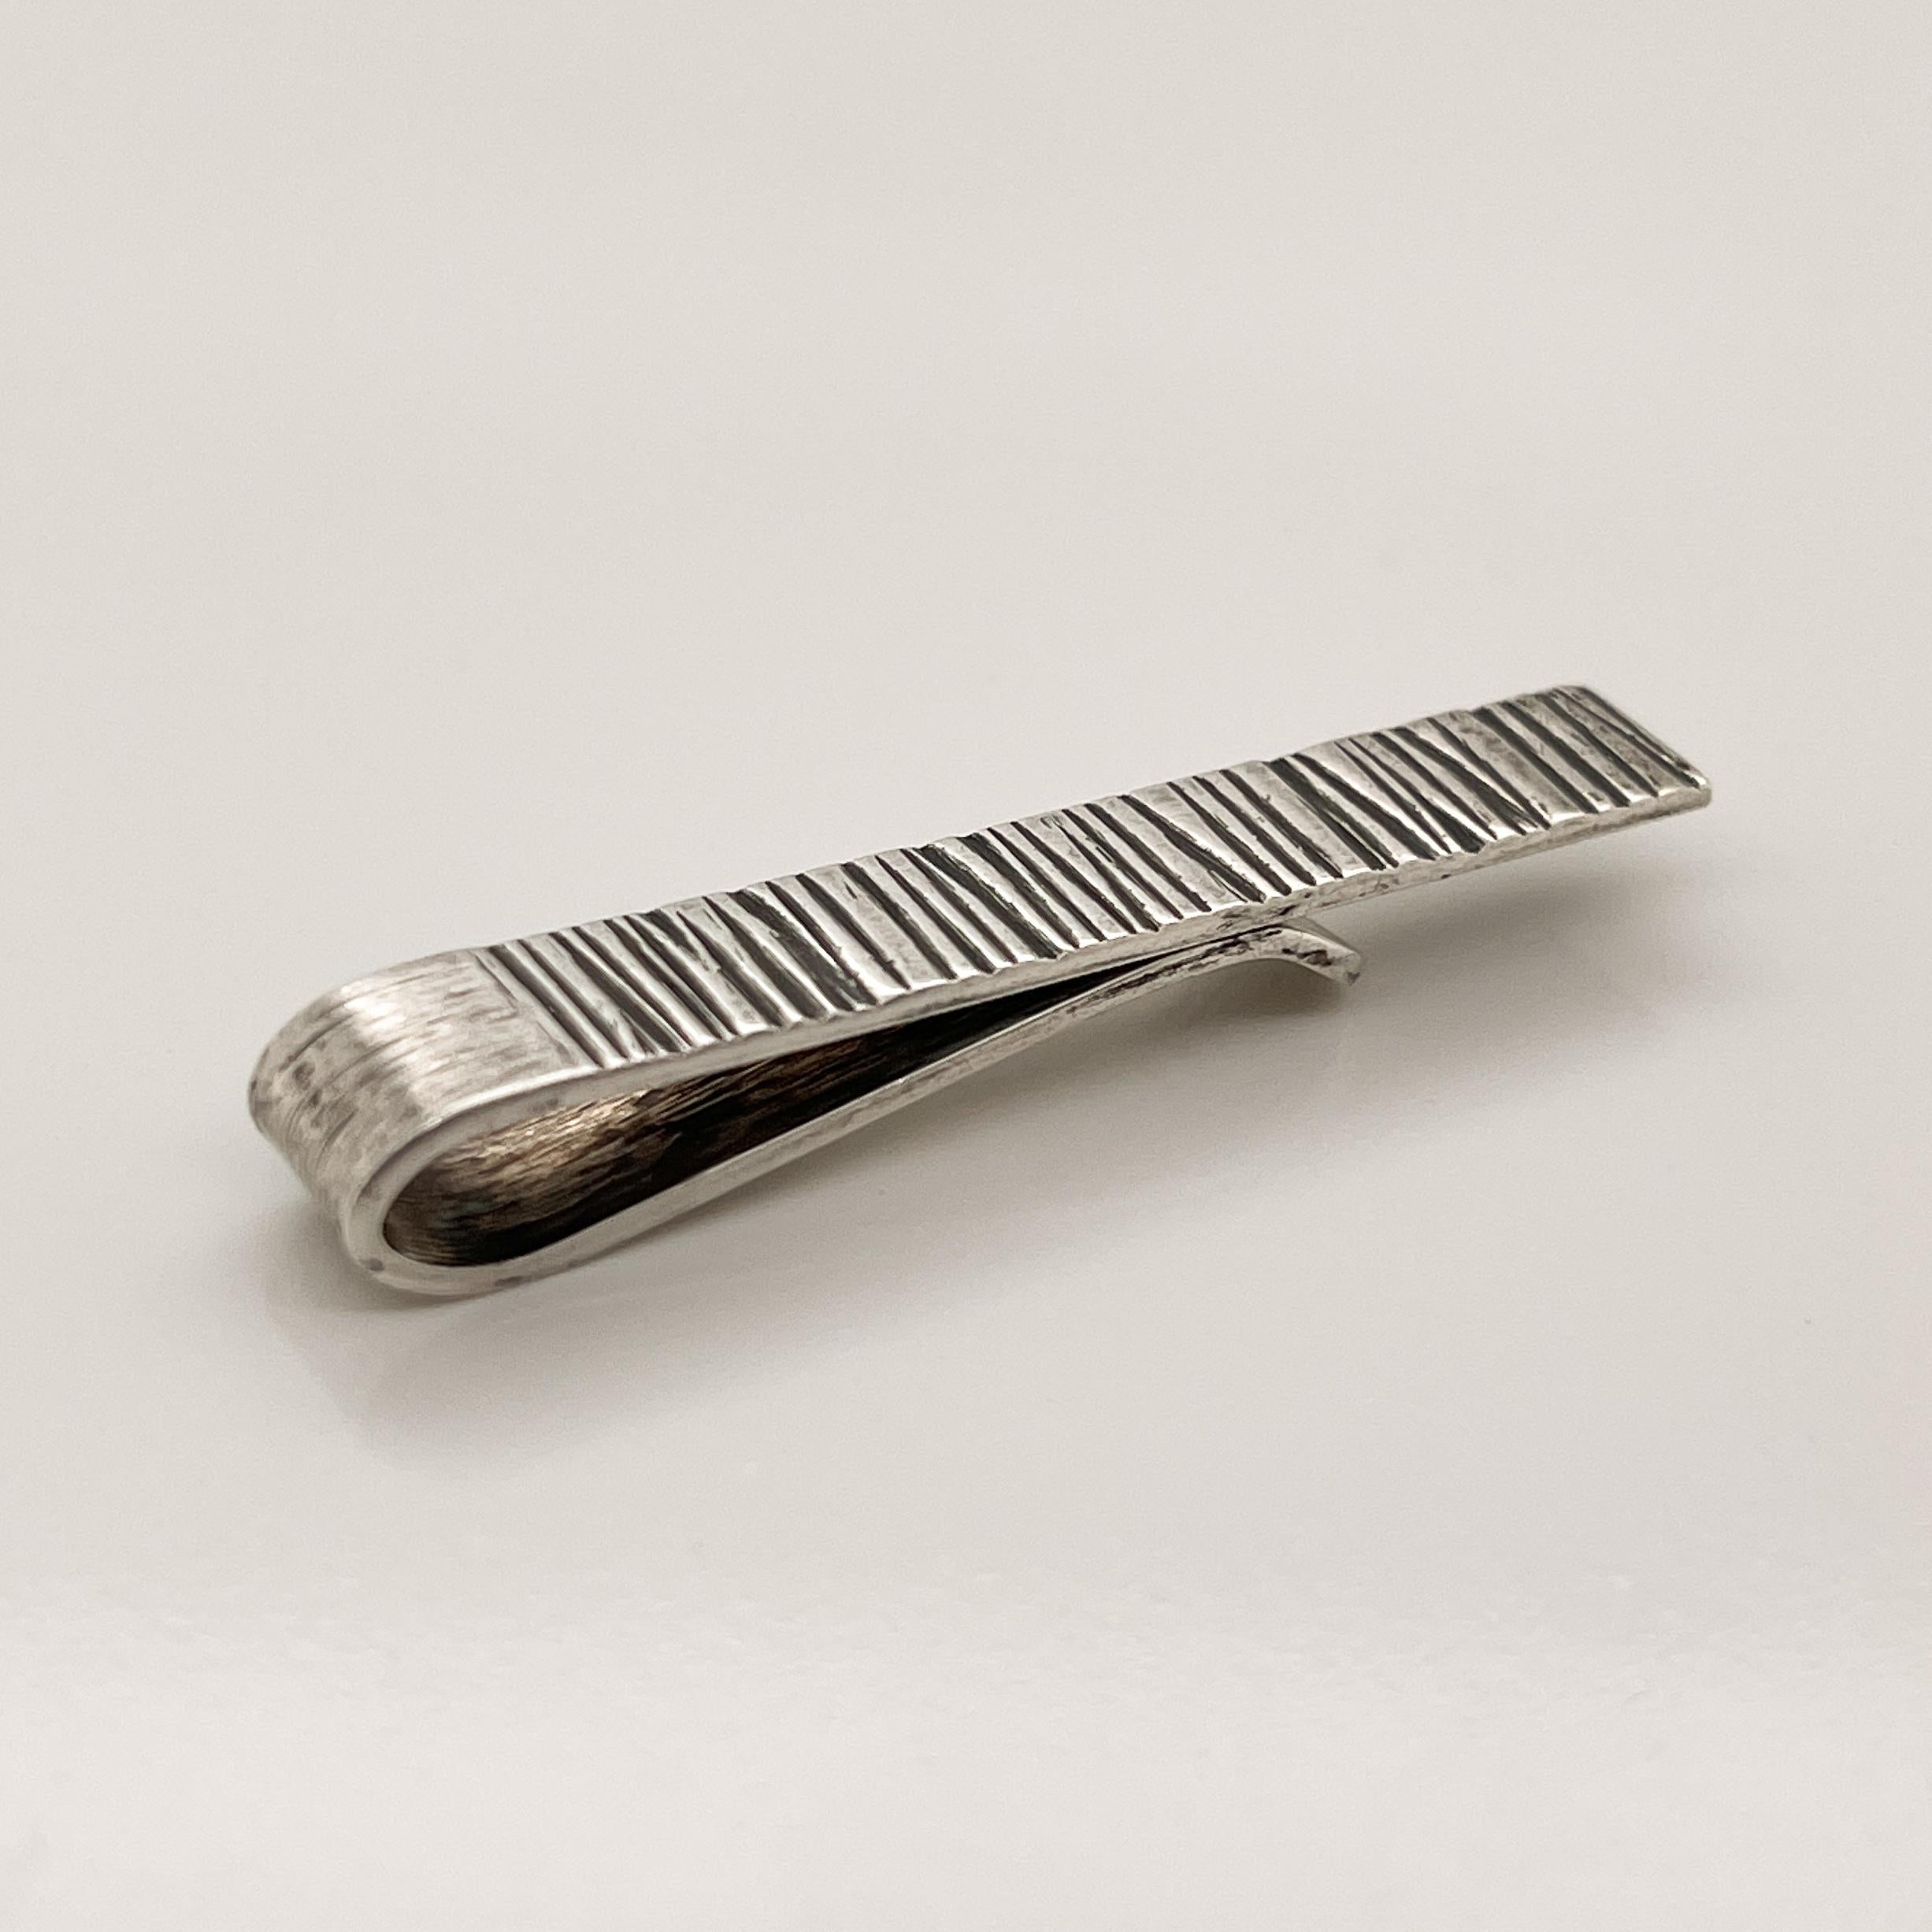 A fine Mid-Century tie bar or money clip.

By the California Modernist silversmith - Harold Fithian.

In sterling silver with an asymmetrically ribbed and brushed finished surface. The ribs recesses are liver sulfur patinated.

Simply a wonderful